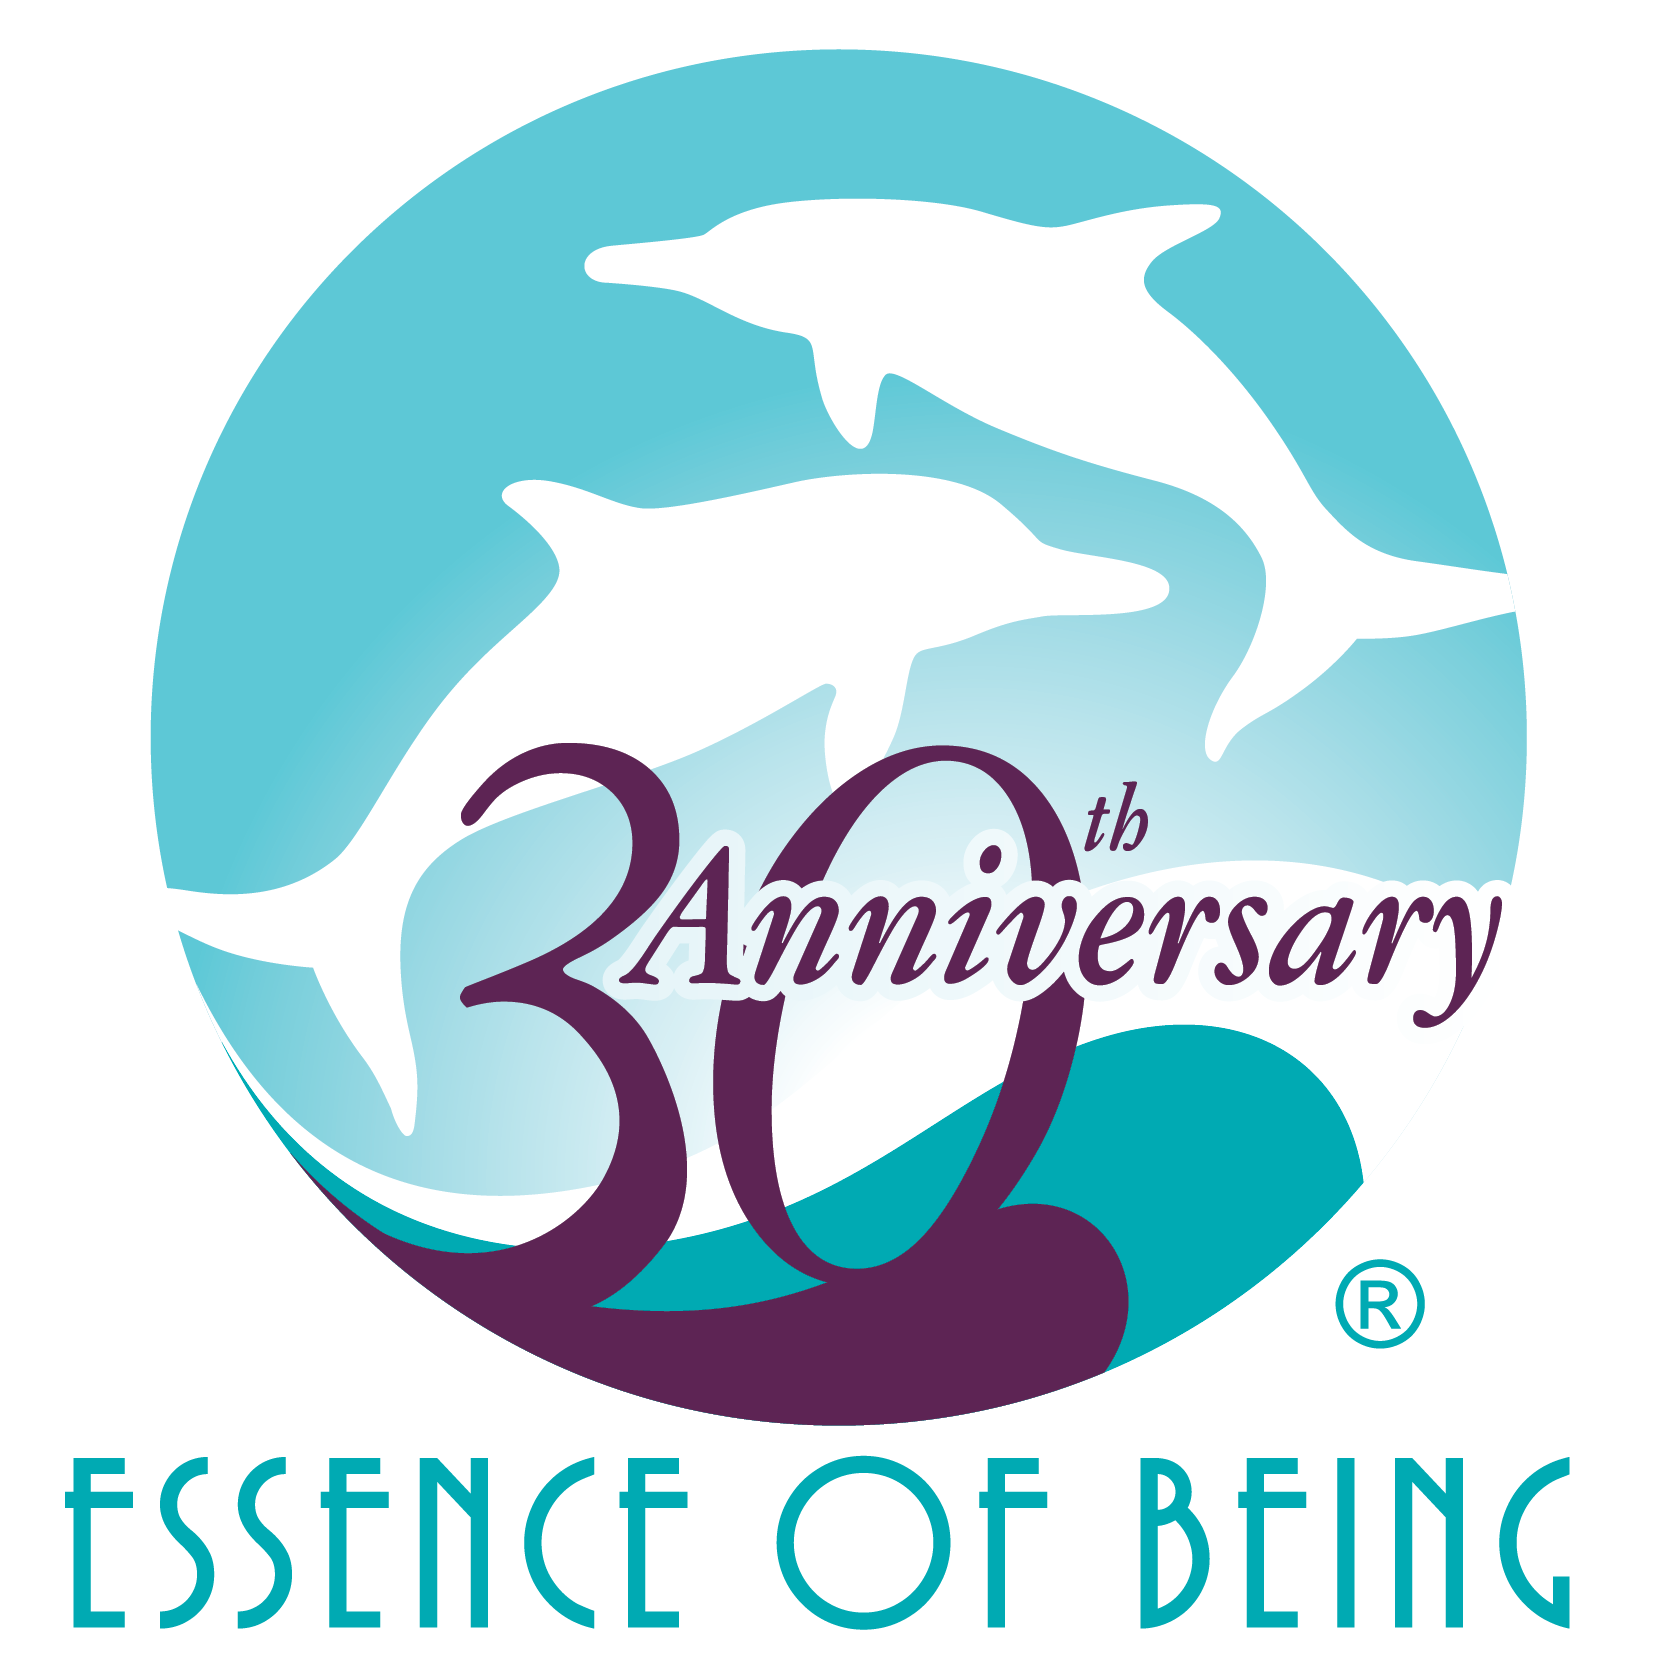 Essence of Being 30th anniversary logo